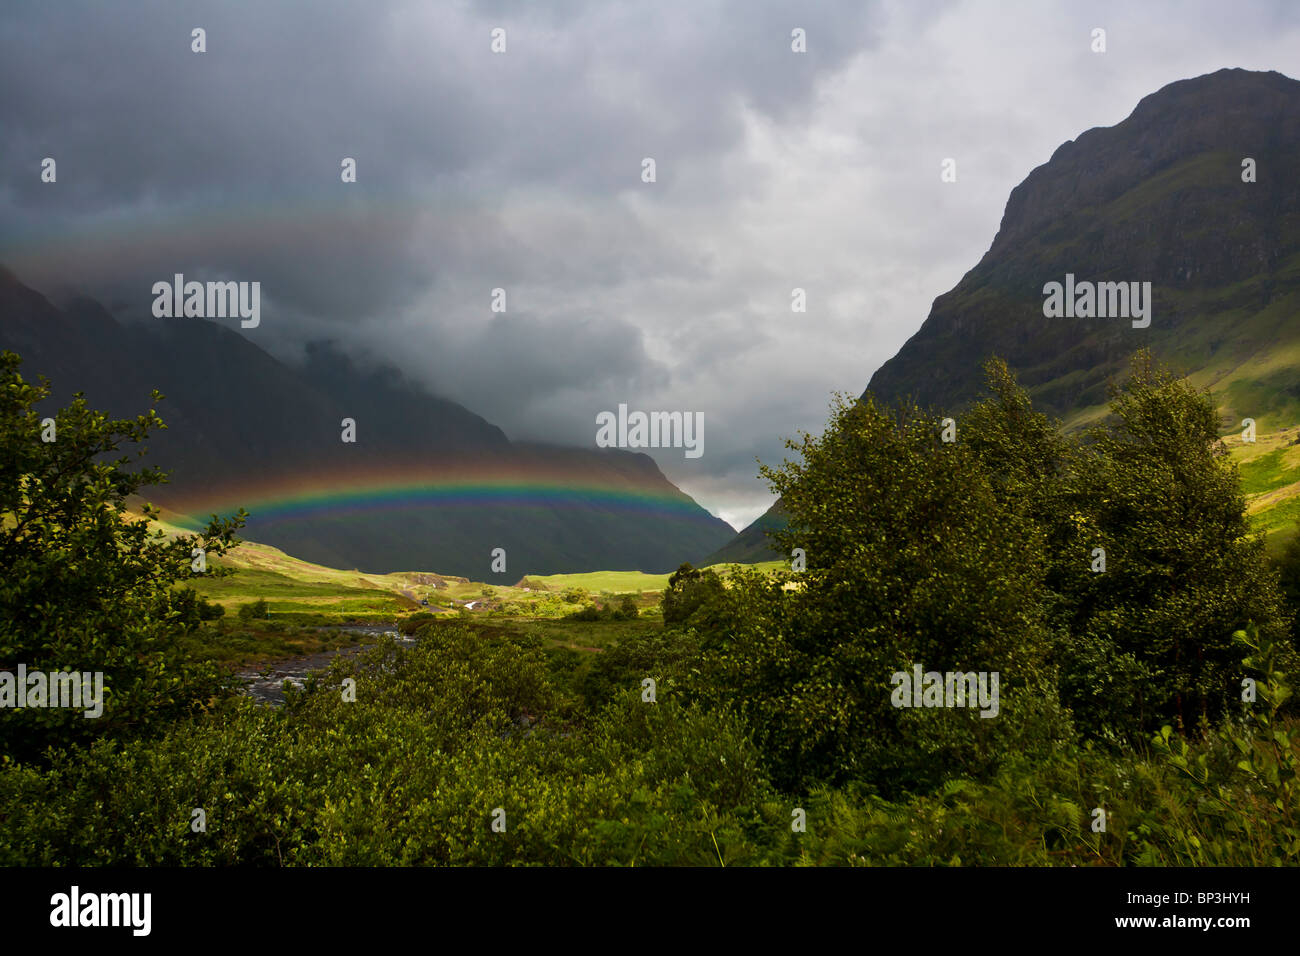 A double rainbow shows against dark clouds in Glencoe, Scotland Stock Photo